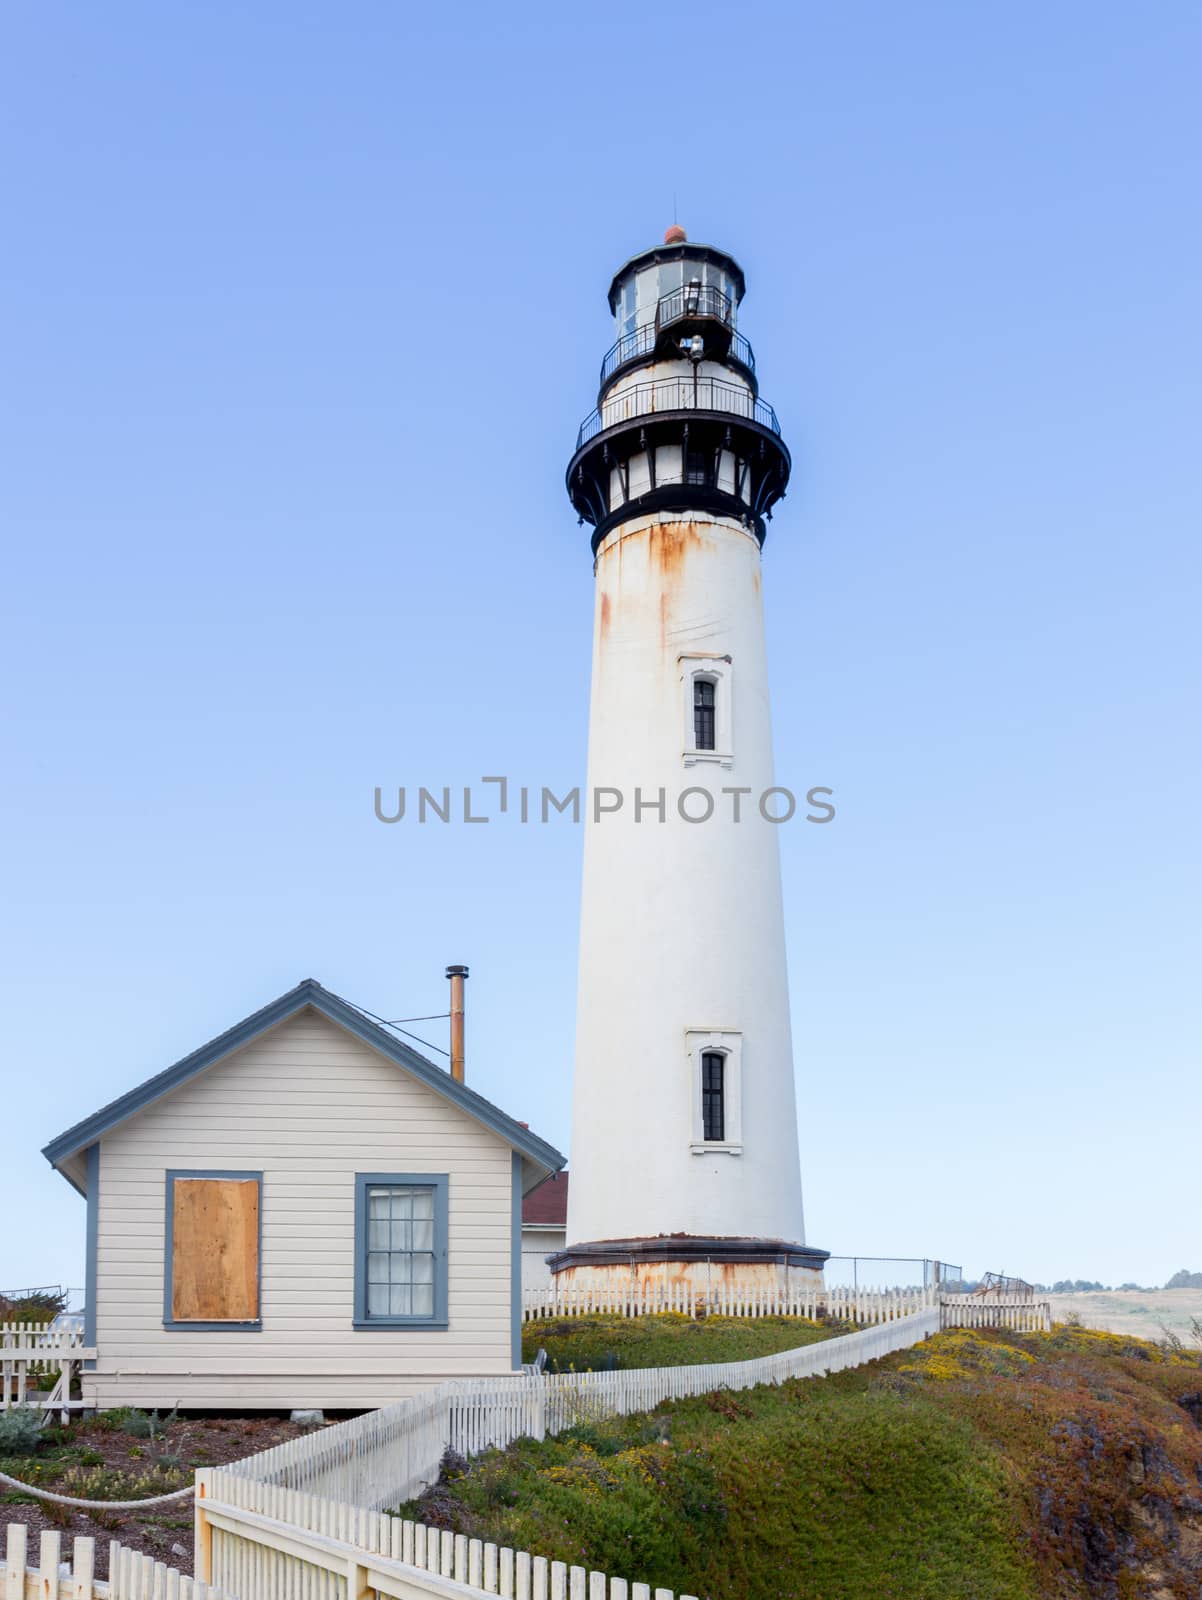 Pigeon Point Lighthouse in San Francisco Bay, California.